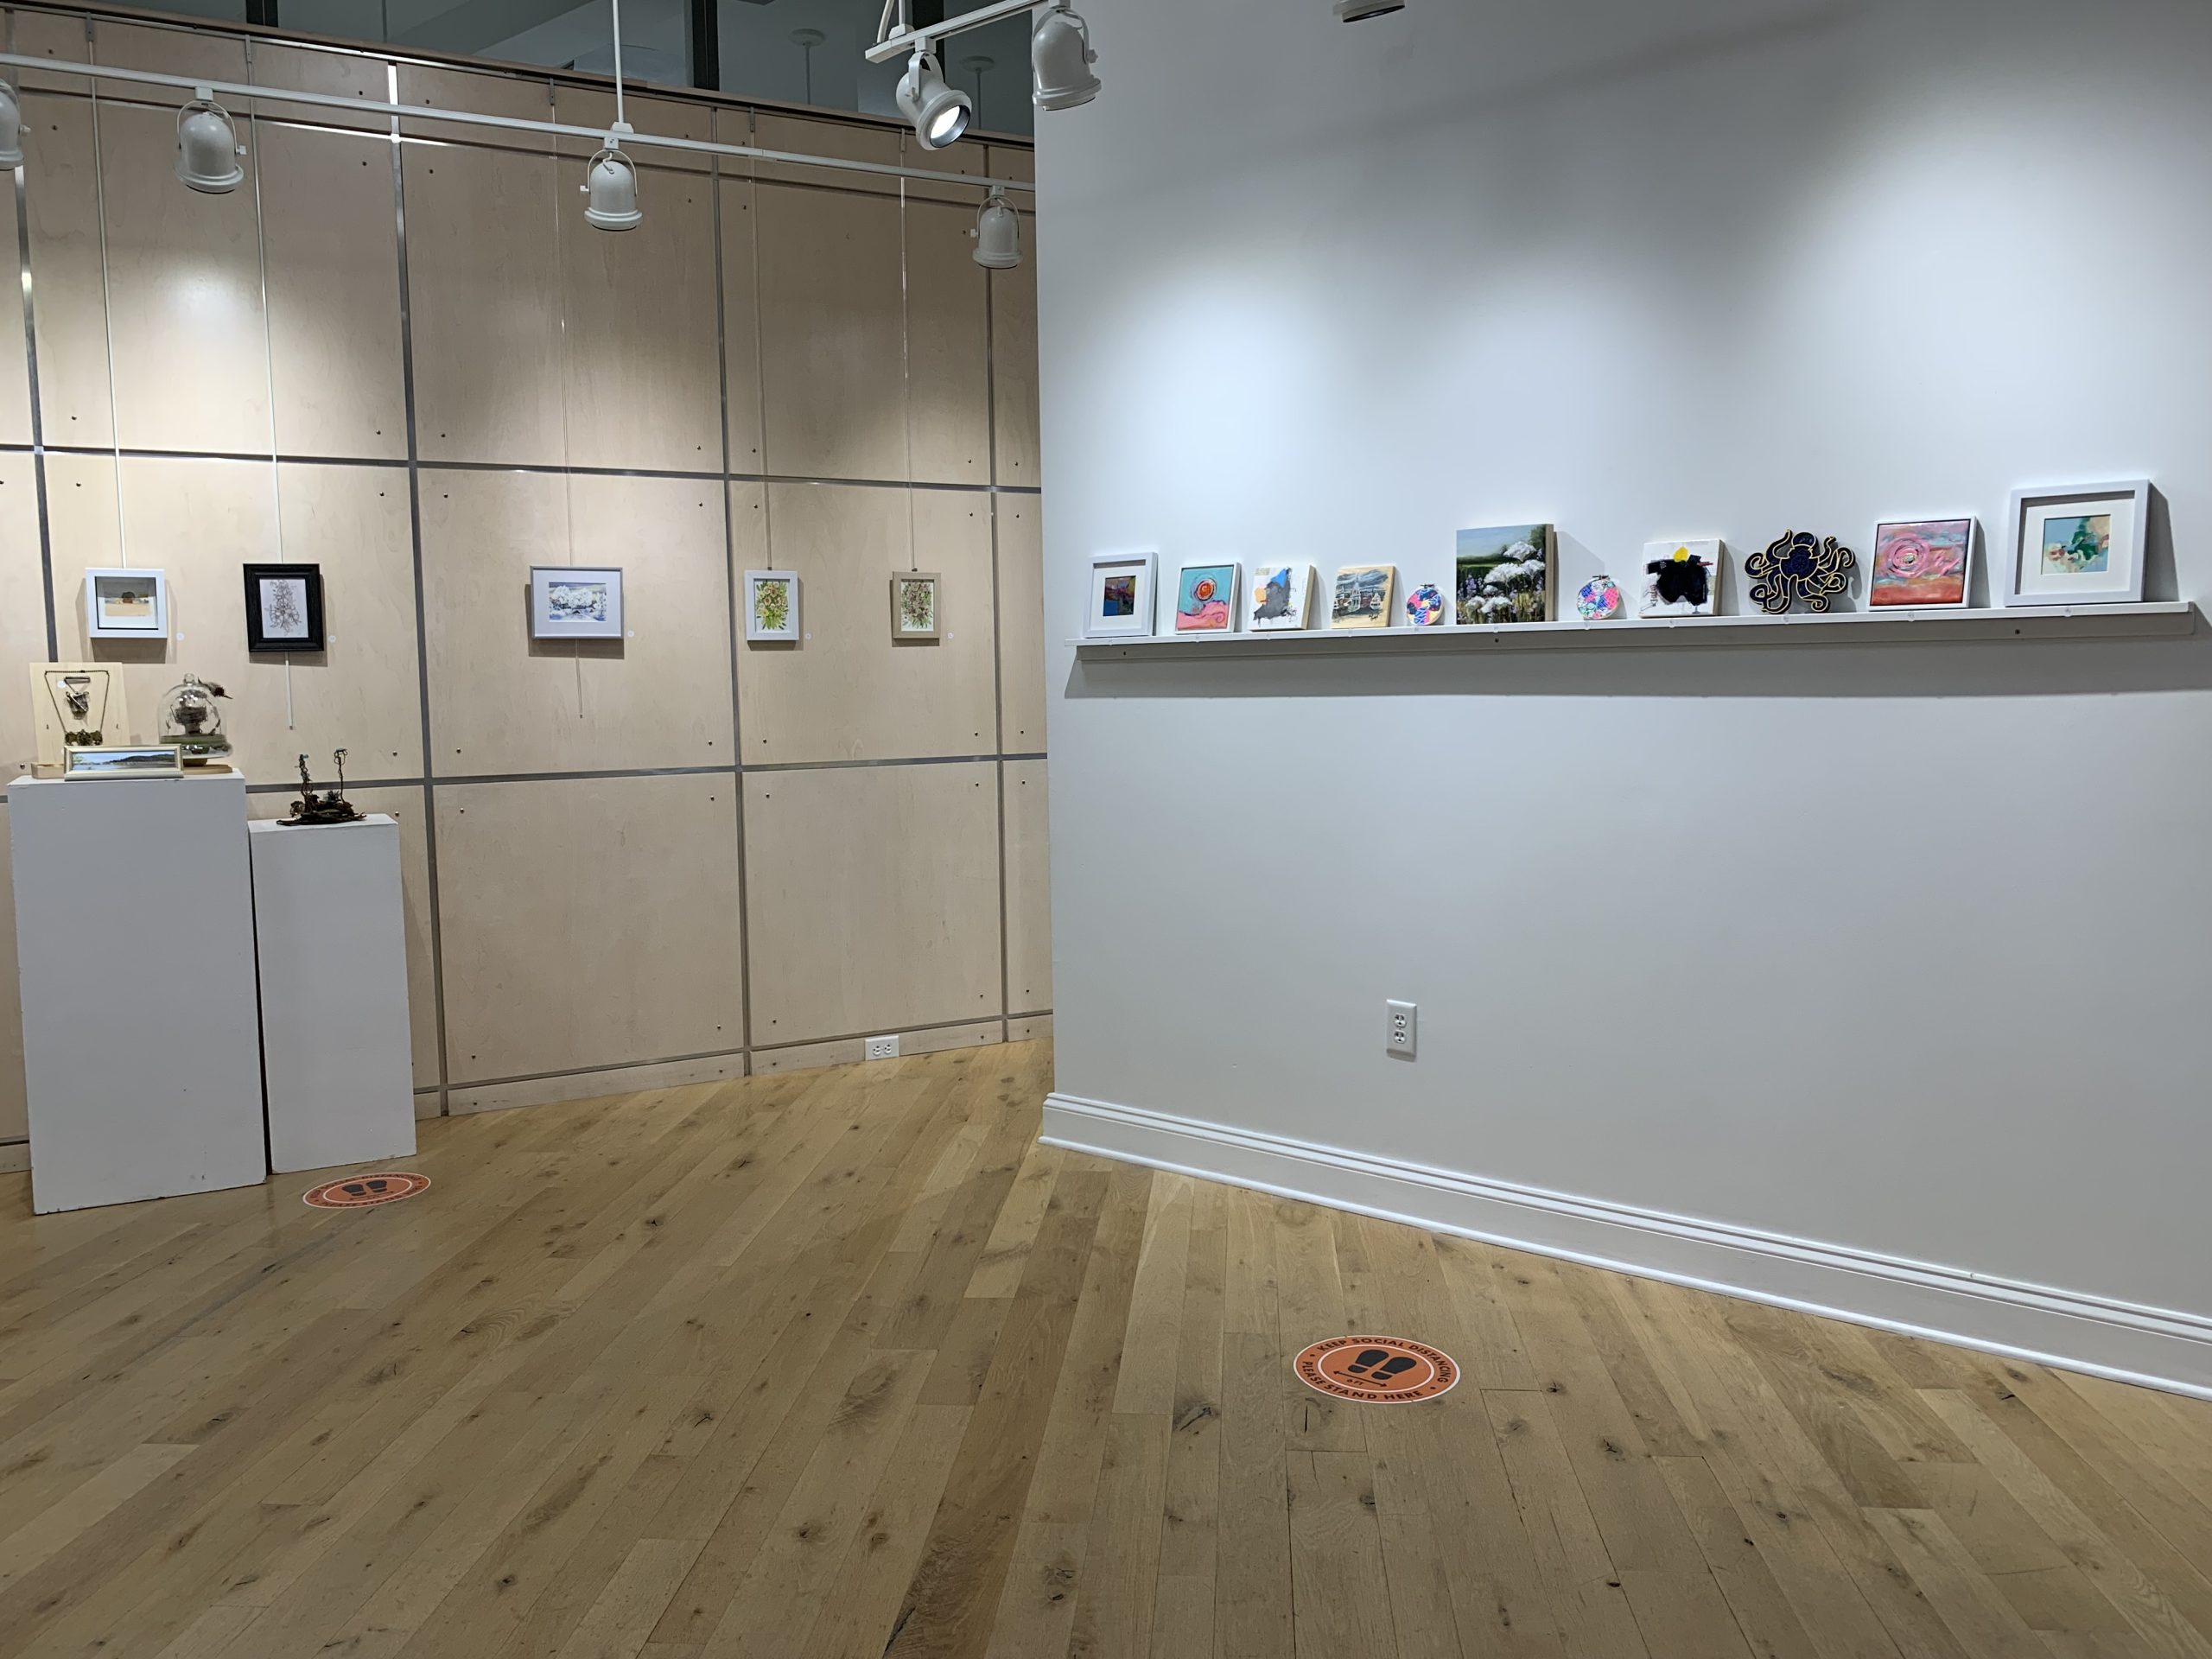 gallery showing 100 under 100 exhibit. artworks in a row sitting on a shelf with pedestals to the left with art